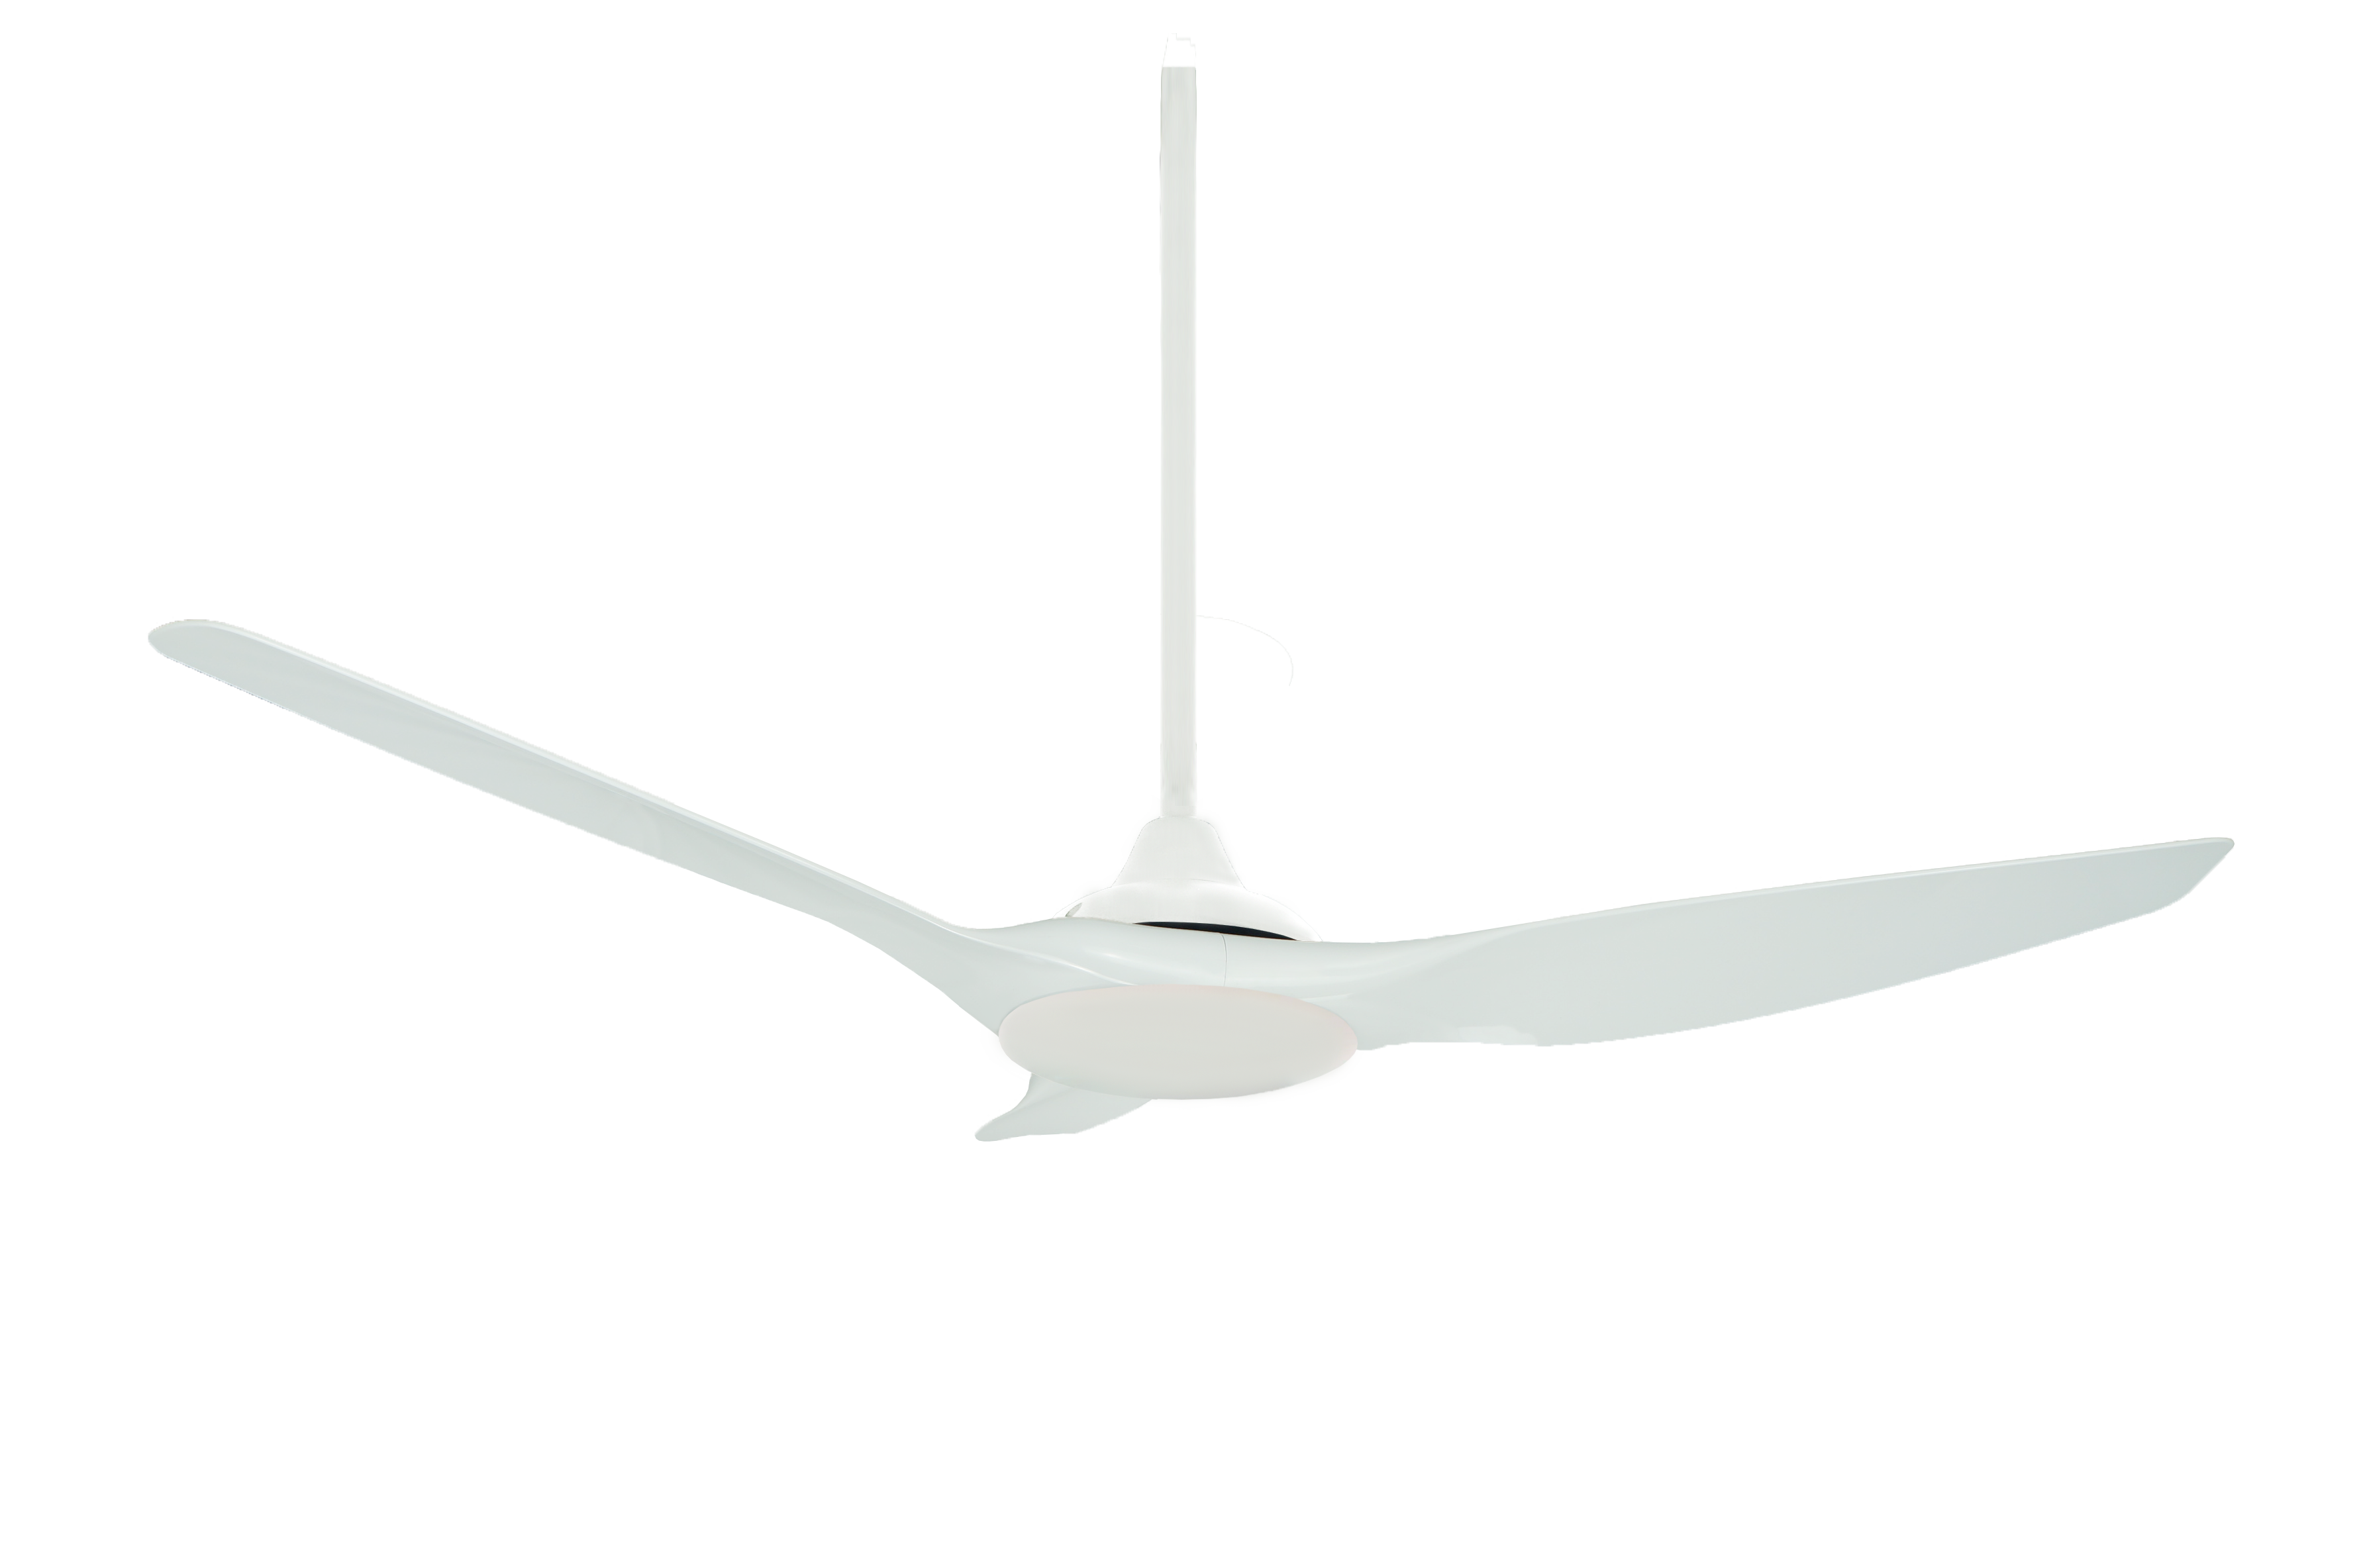 Modern Simple Style 3 ABS Blade For Families And Hotels 52inch With Modern Decorative Dc Motor Led Ceiling Fan